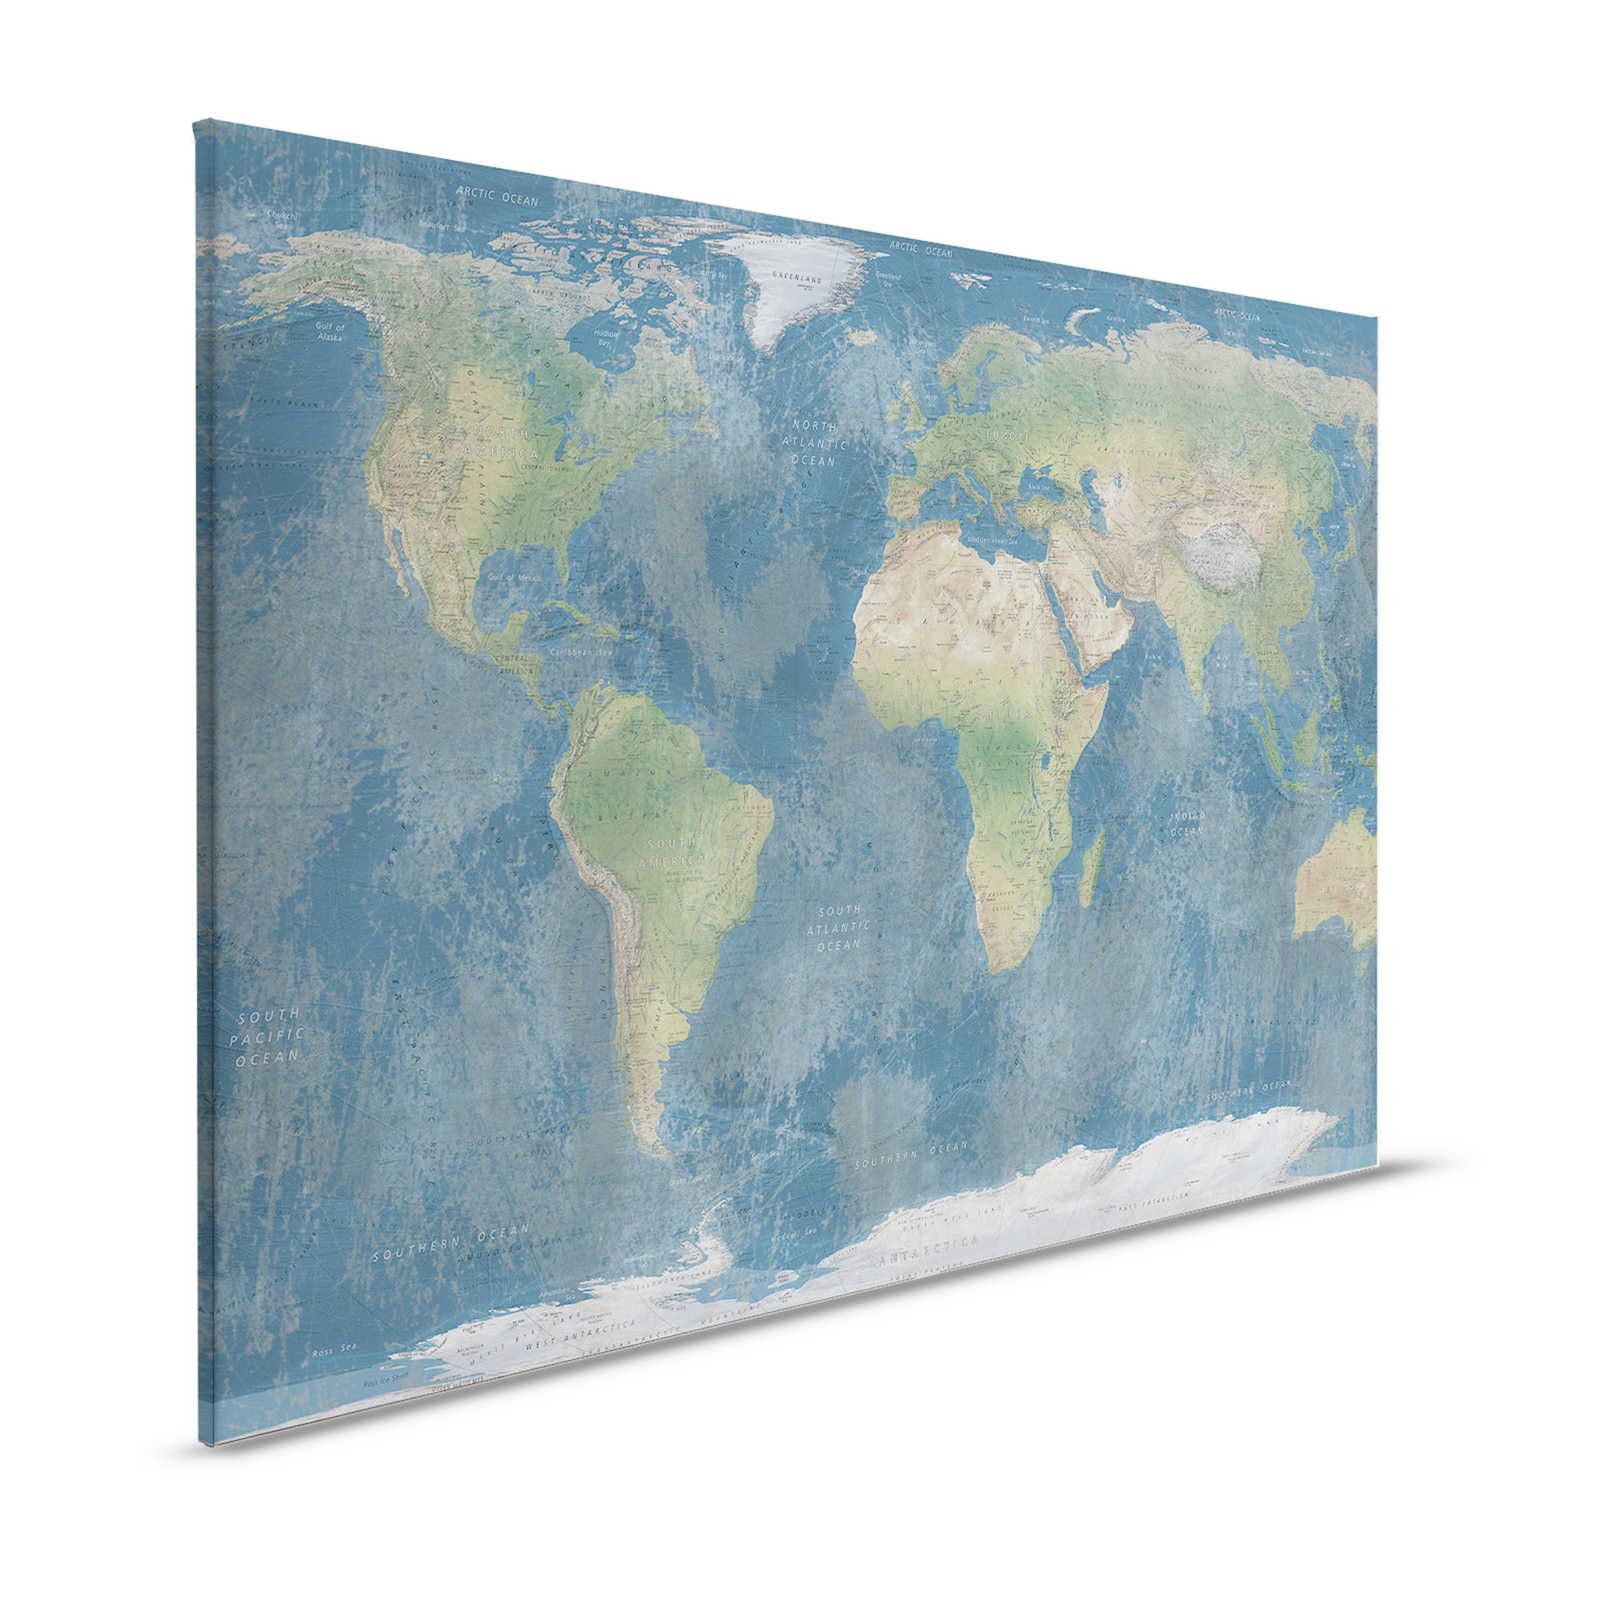 Canvas painting World map in natural colouring - 1.20 m x 0.80 m
